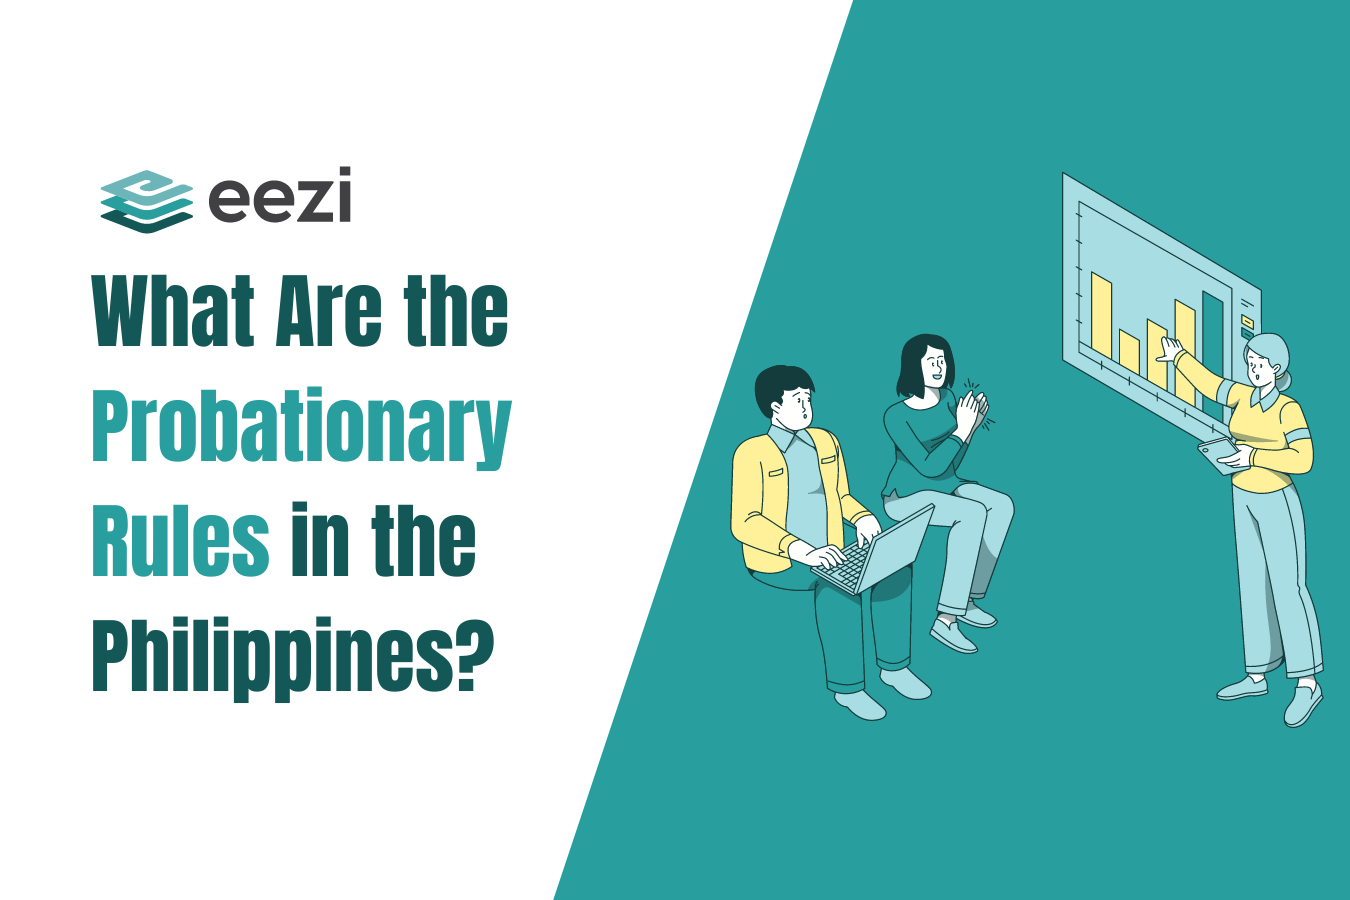 What Are the Probationary Rules in the Philippines